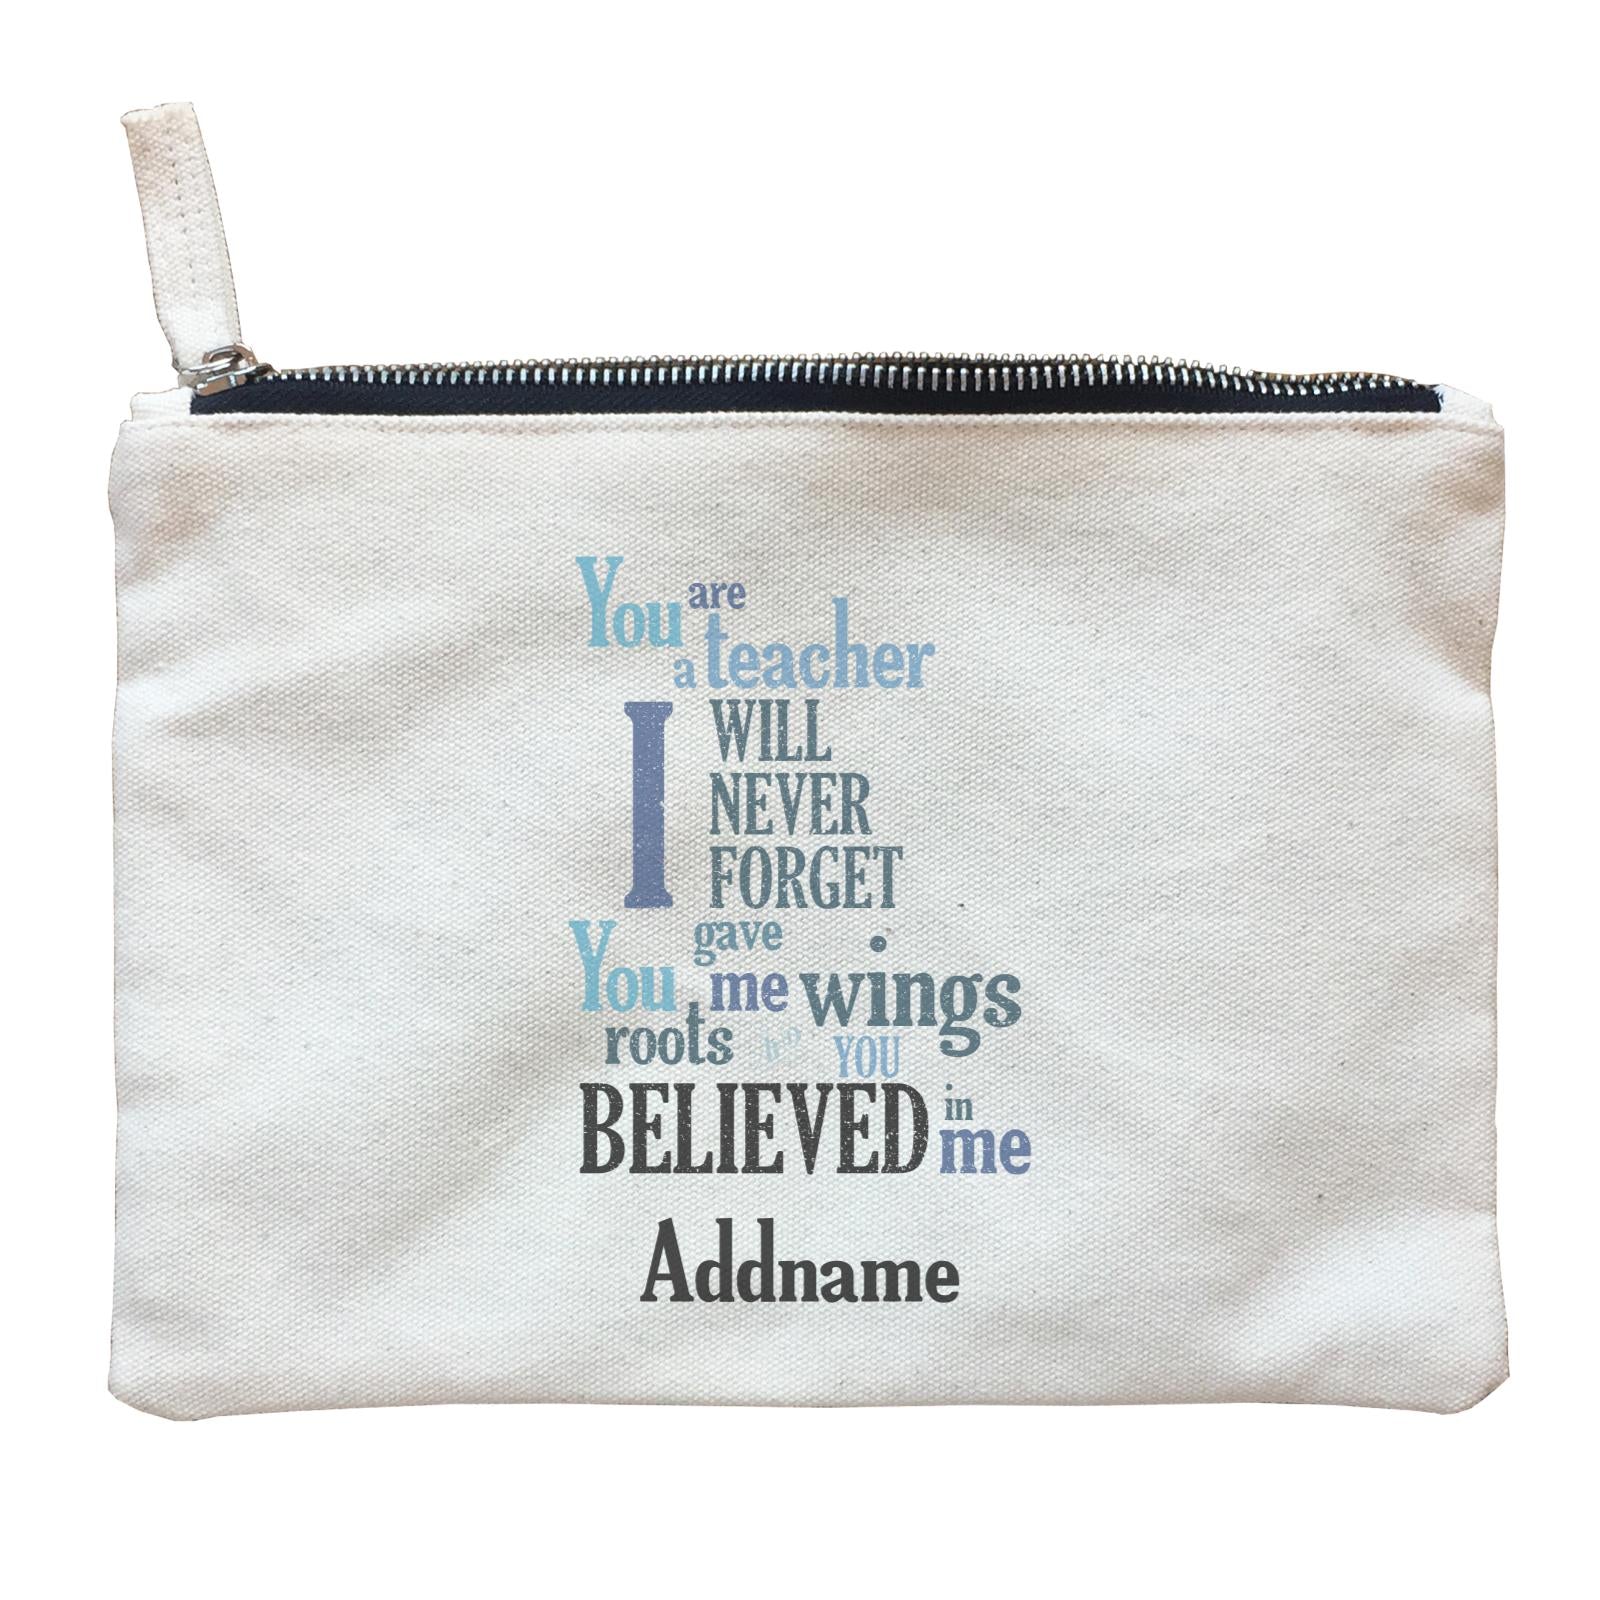 Super Teachers I Will Never Forget You Gave Me Wings Roots And You Believed In Me Addname Zipper Pouch